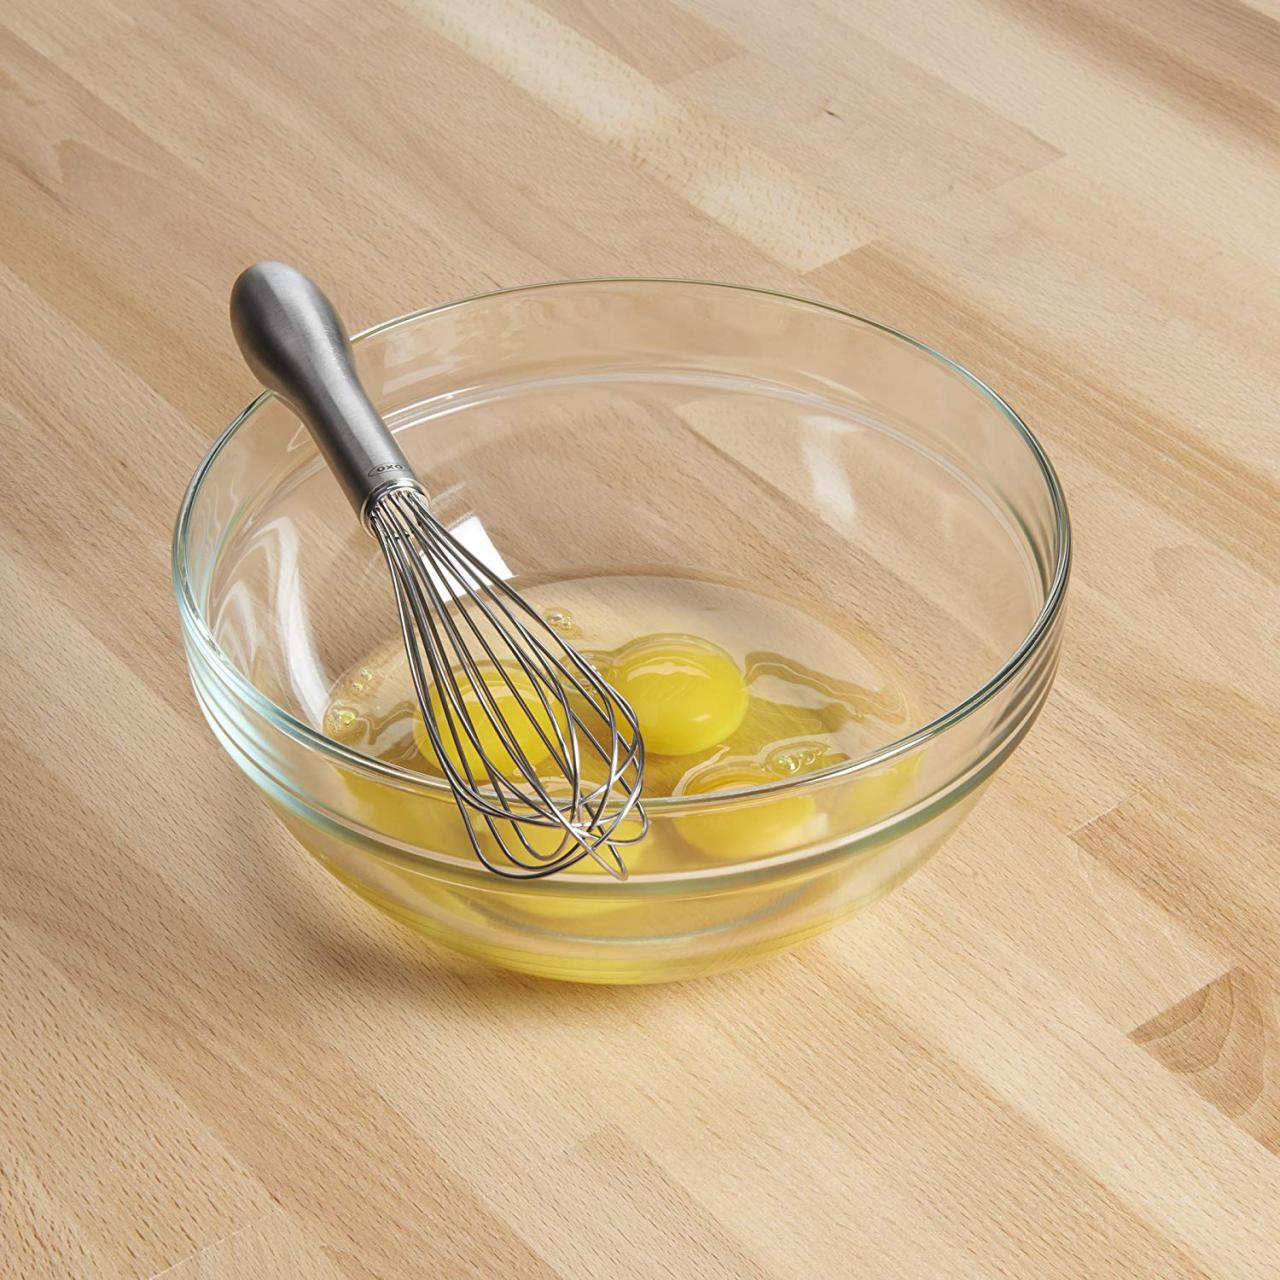 https://food.fnr.sndimg.com/content/dam/images/food/products/2019/7/23/rx_oxo-steel-9-inch-better-wire-whisk.jpeg.rend.hgtvcom.1280.1280.suffix/1563909587058.jpeg